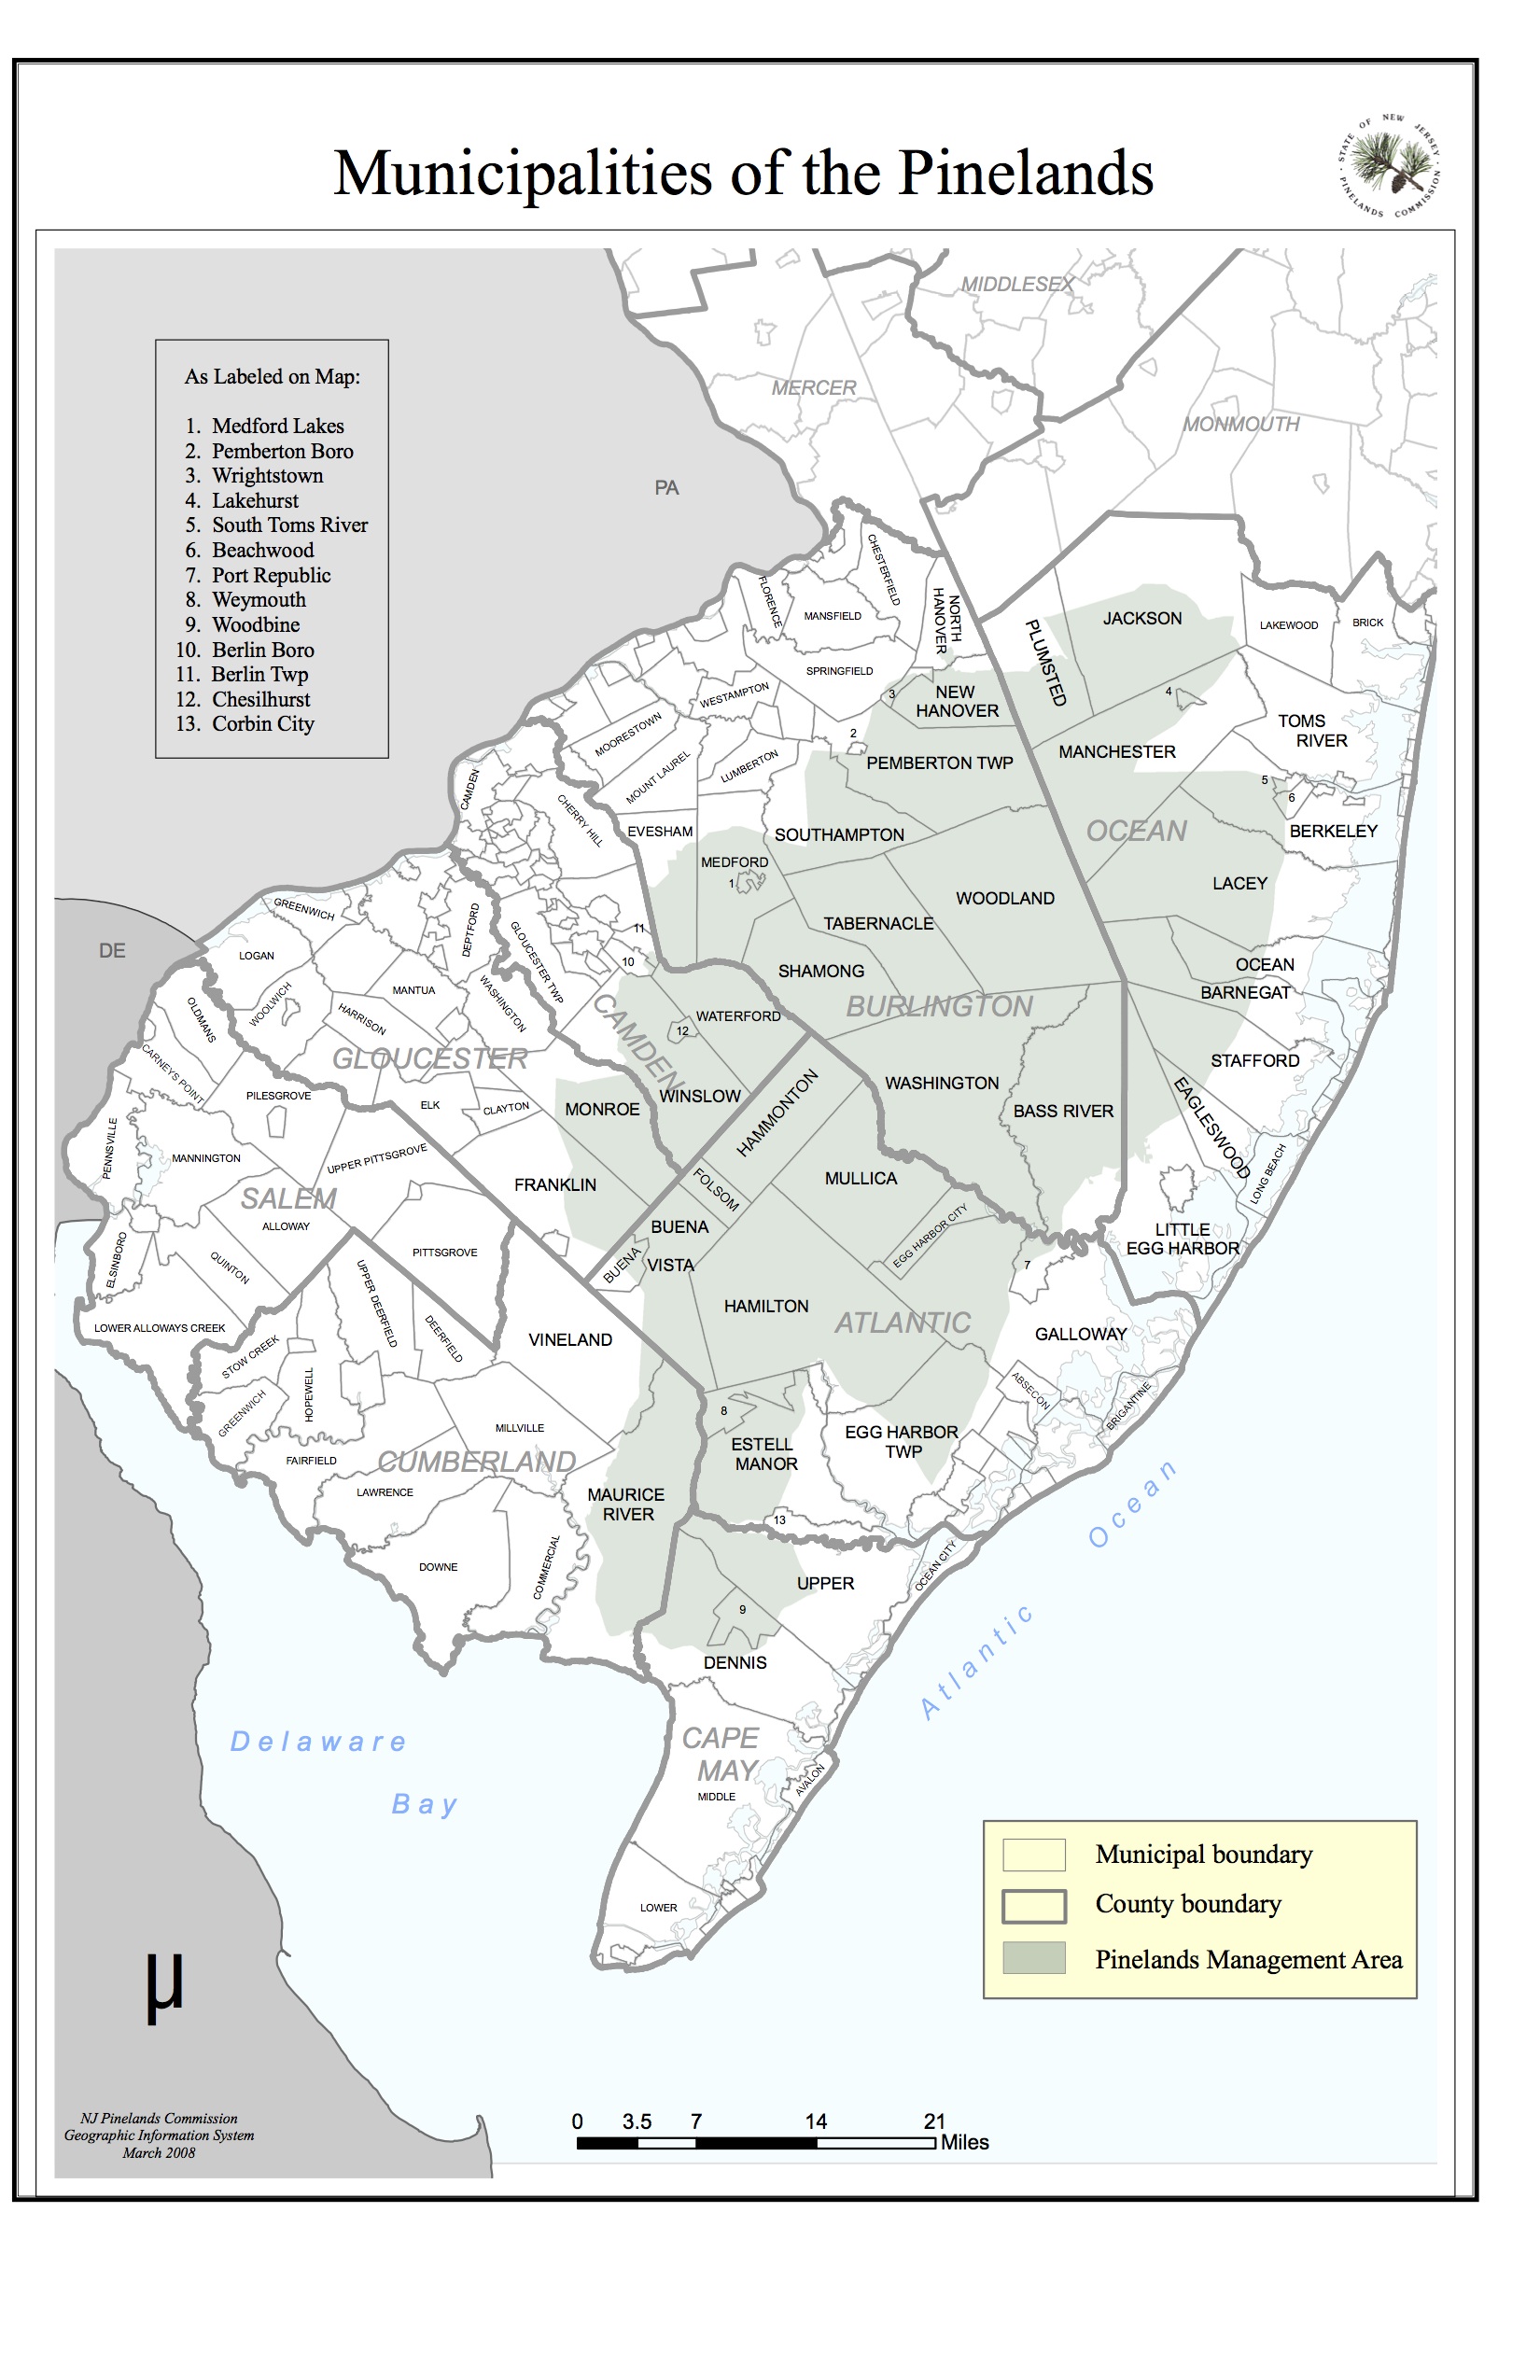 a map of the various municipalities of the Pinelands